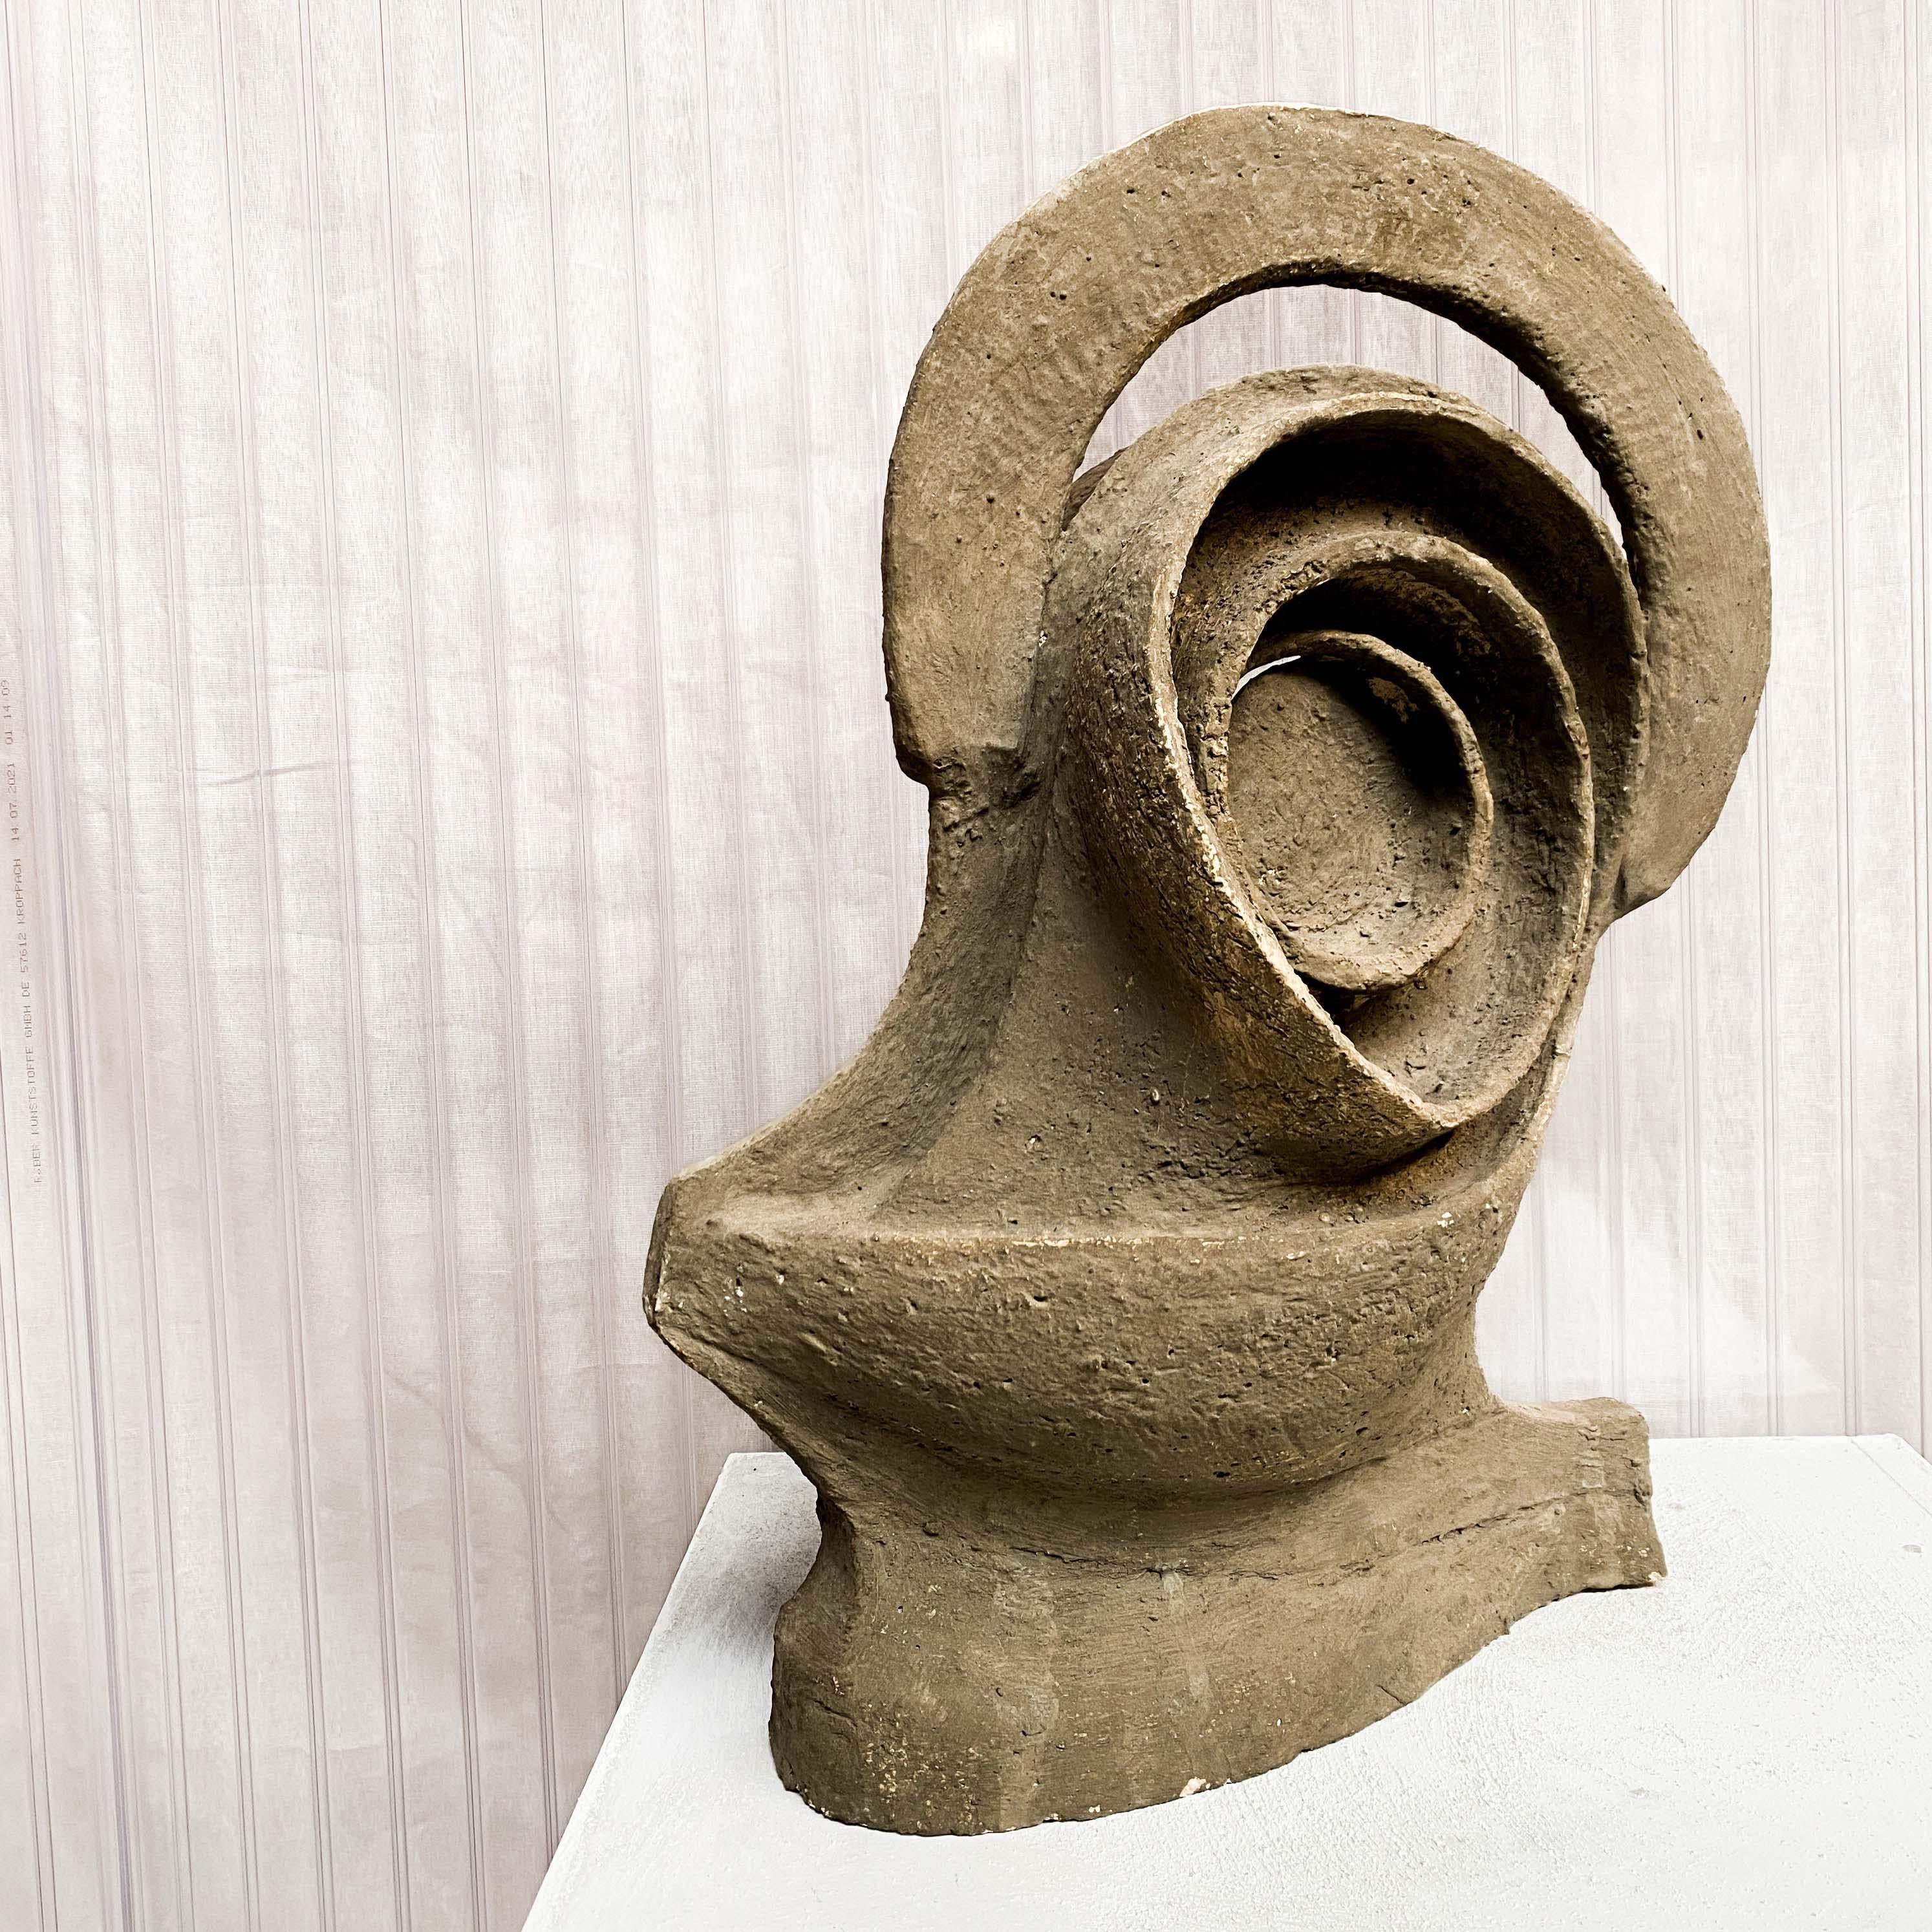 Experimental Brutalist Ceramic Sculpture in Grey Clay, 1970’s For Sale 3